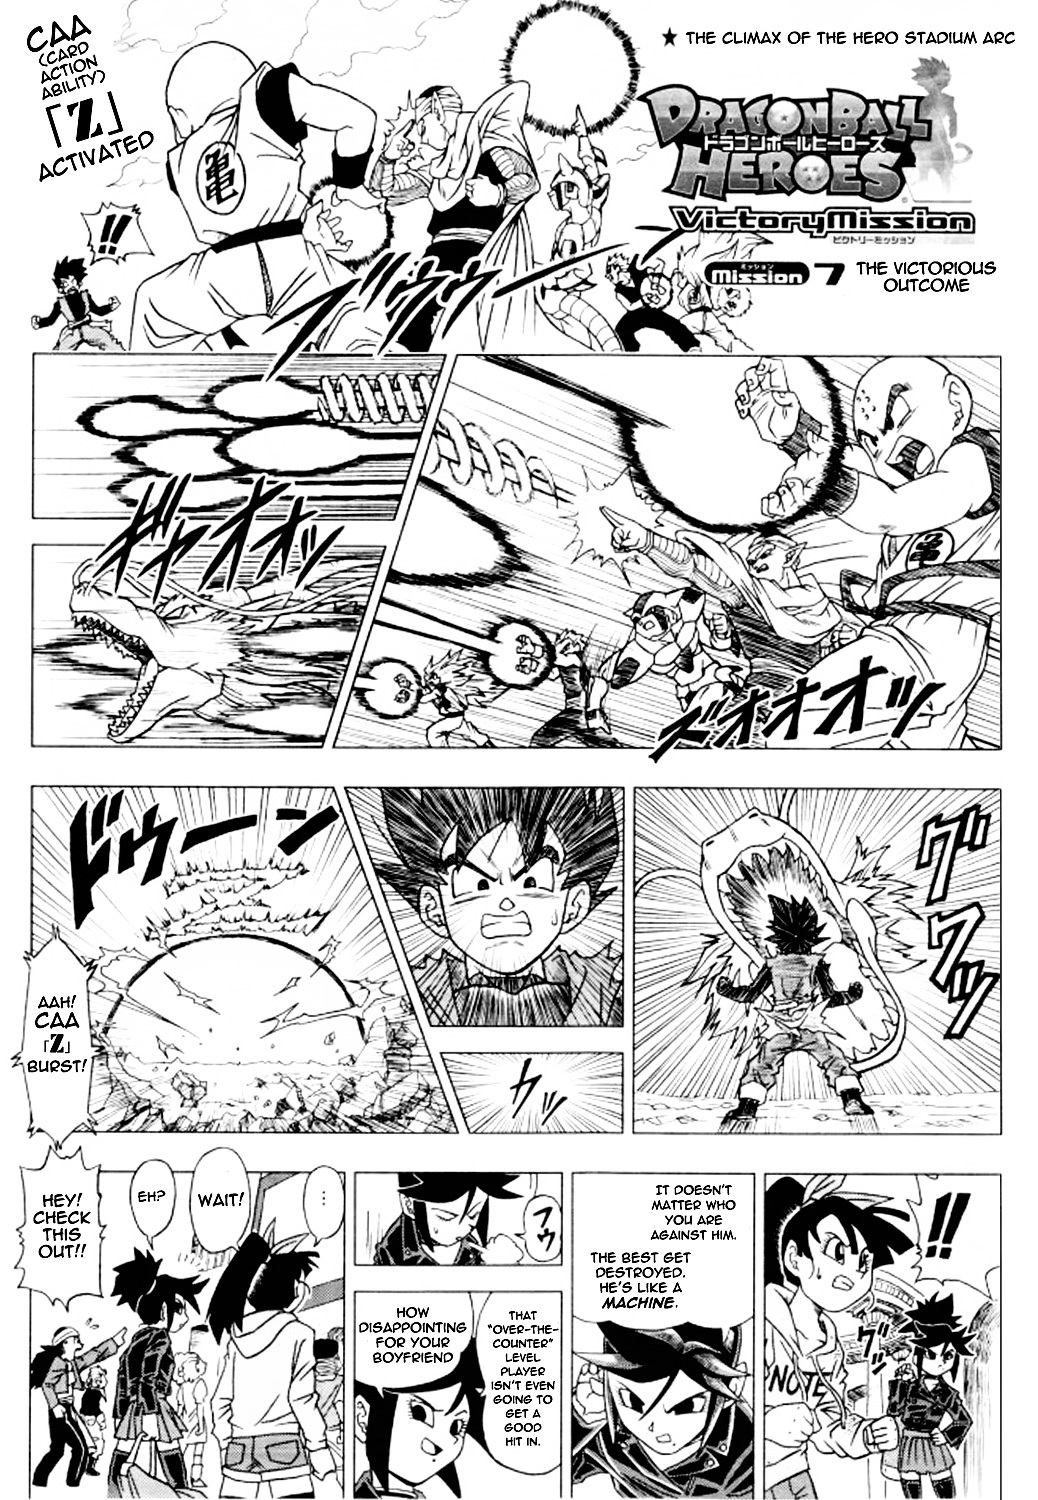 Dragon Ball Heroes - Victory Mission - chapter 7 - #1